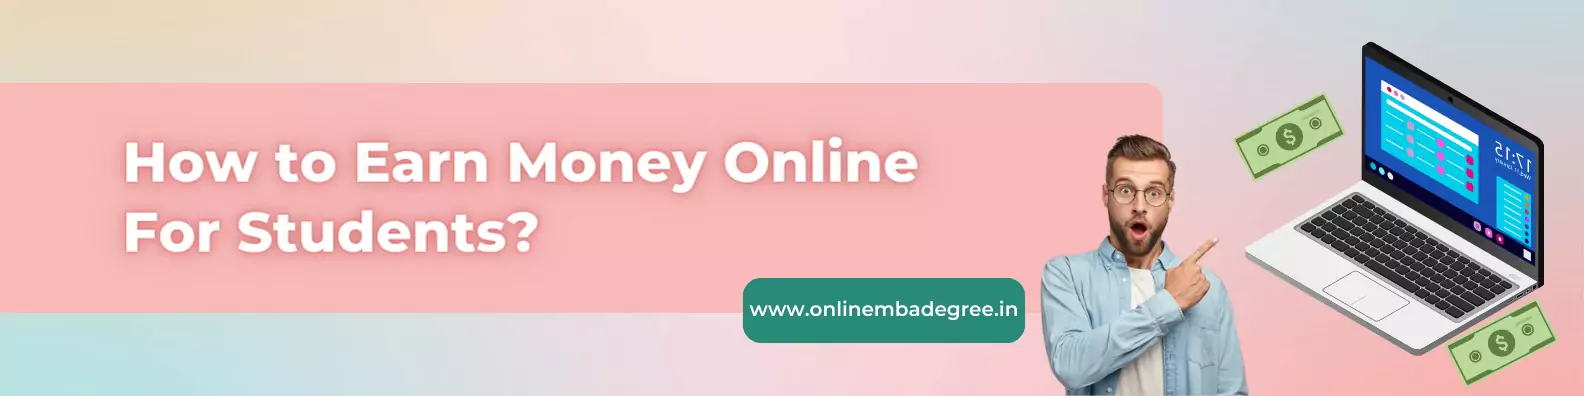 How to earn Money Online For Students